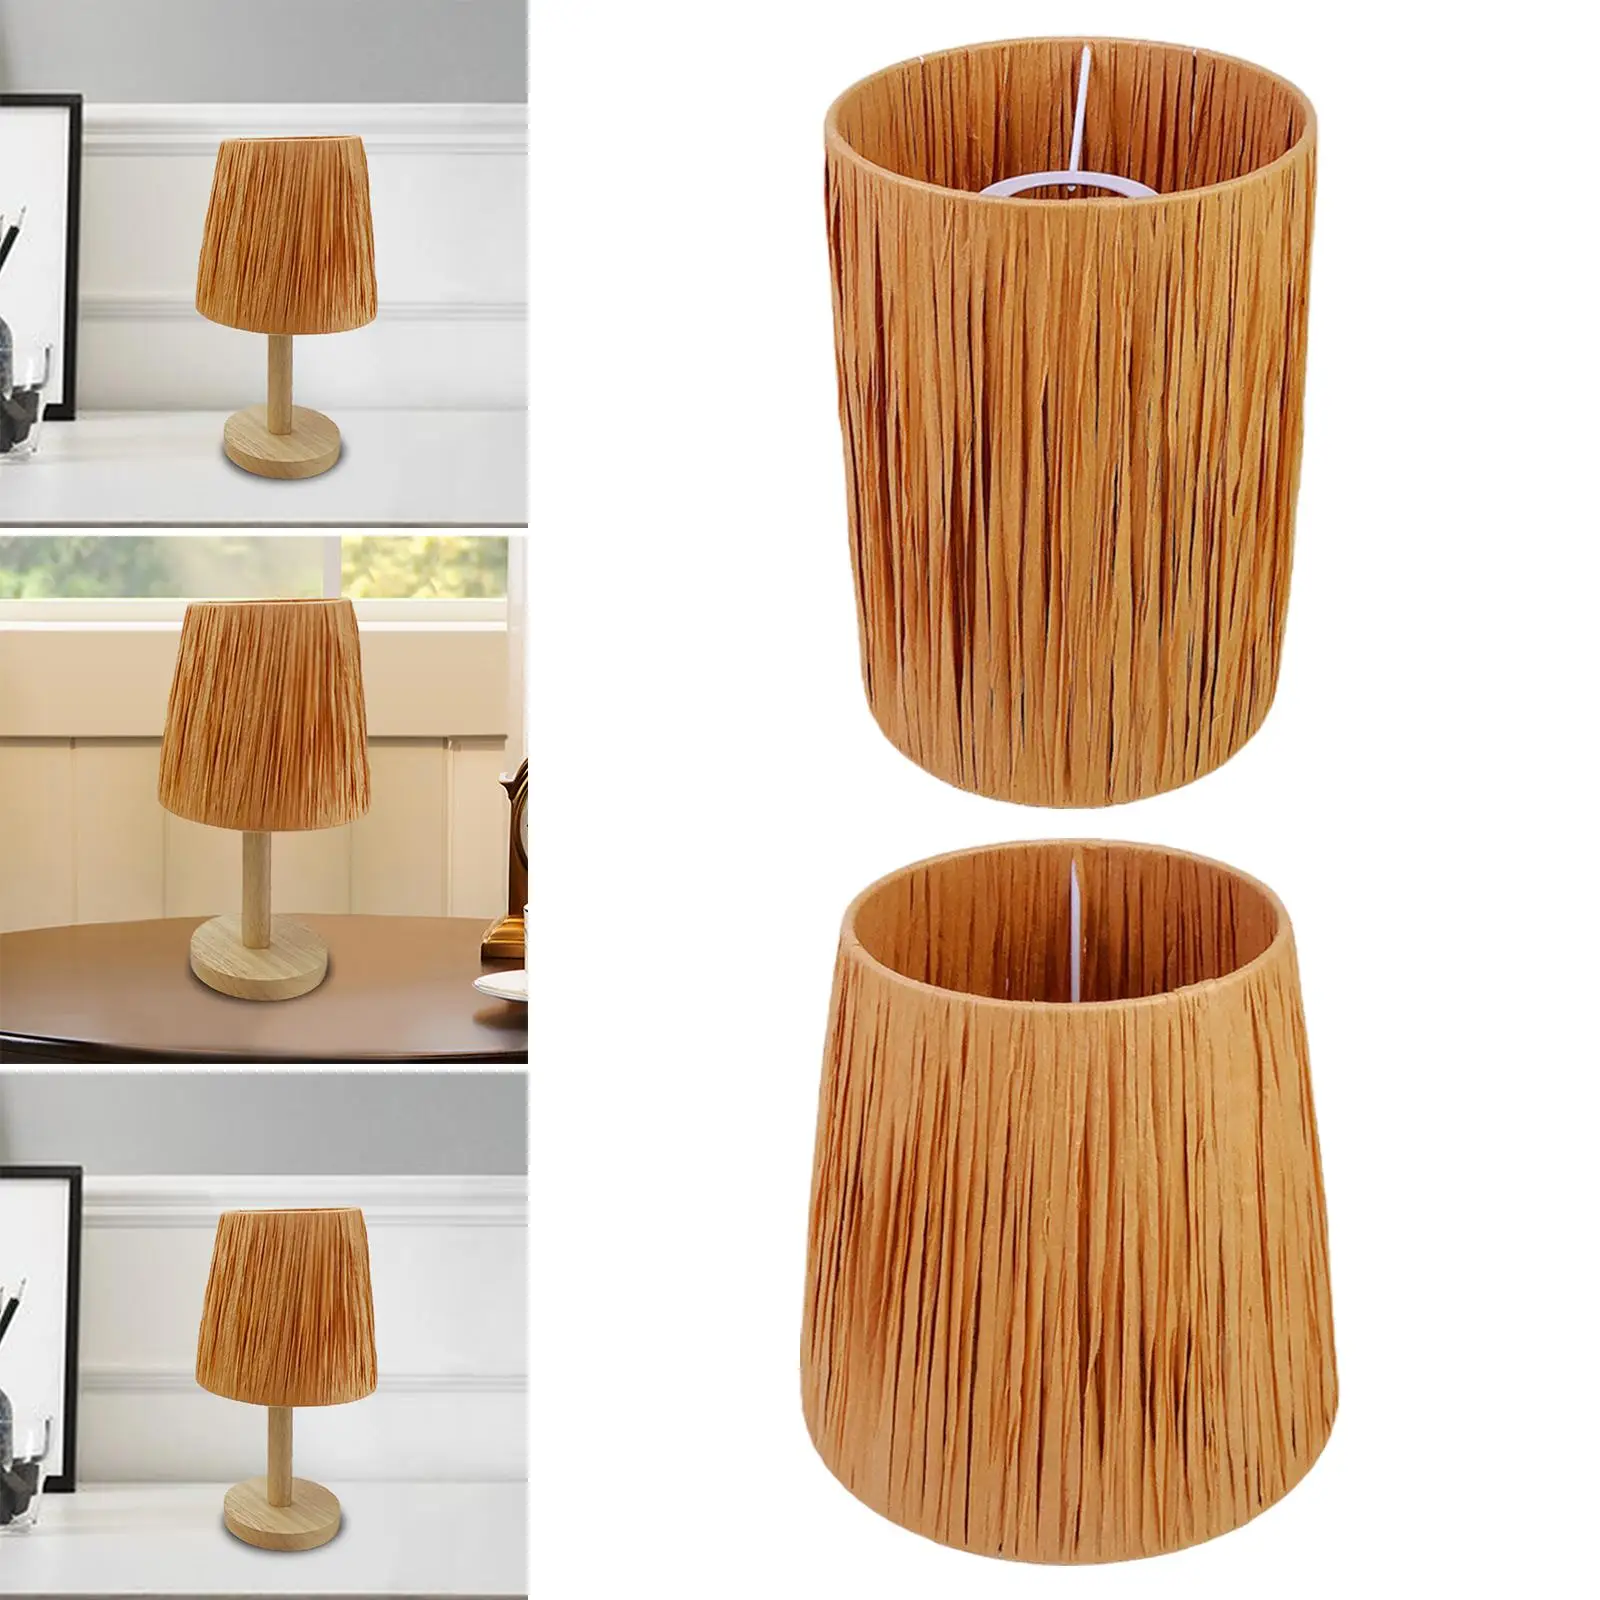 Lamp Shade Easy to Install Handwoven Stylish Raffia for Table Bedside Home